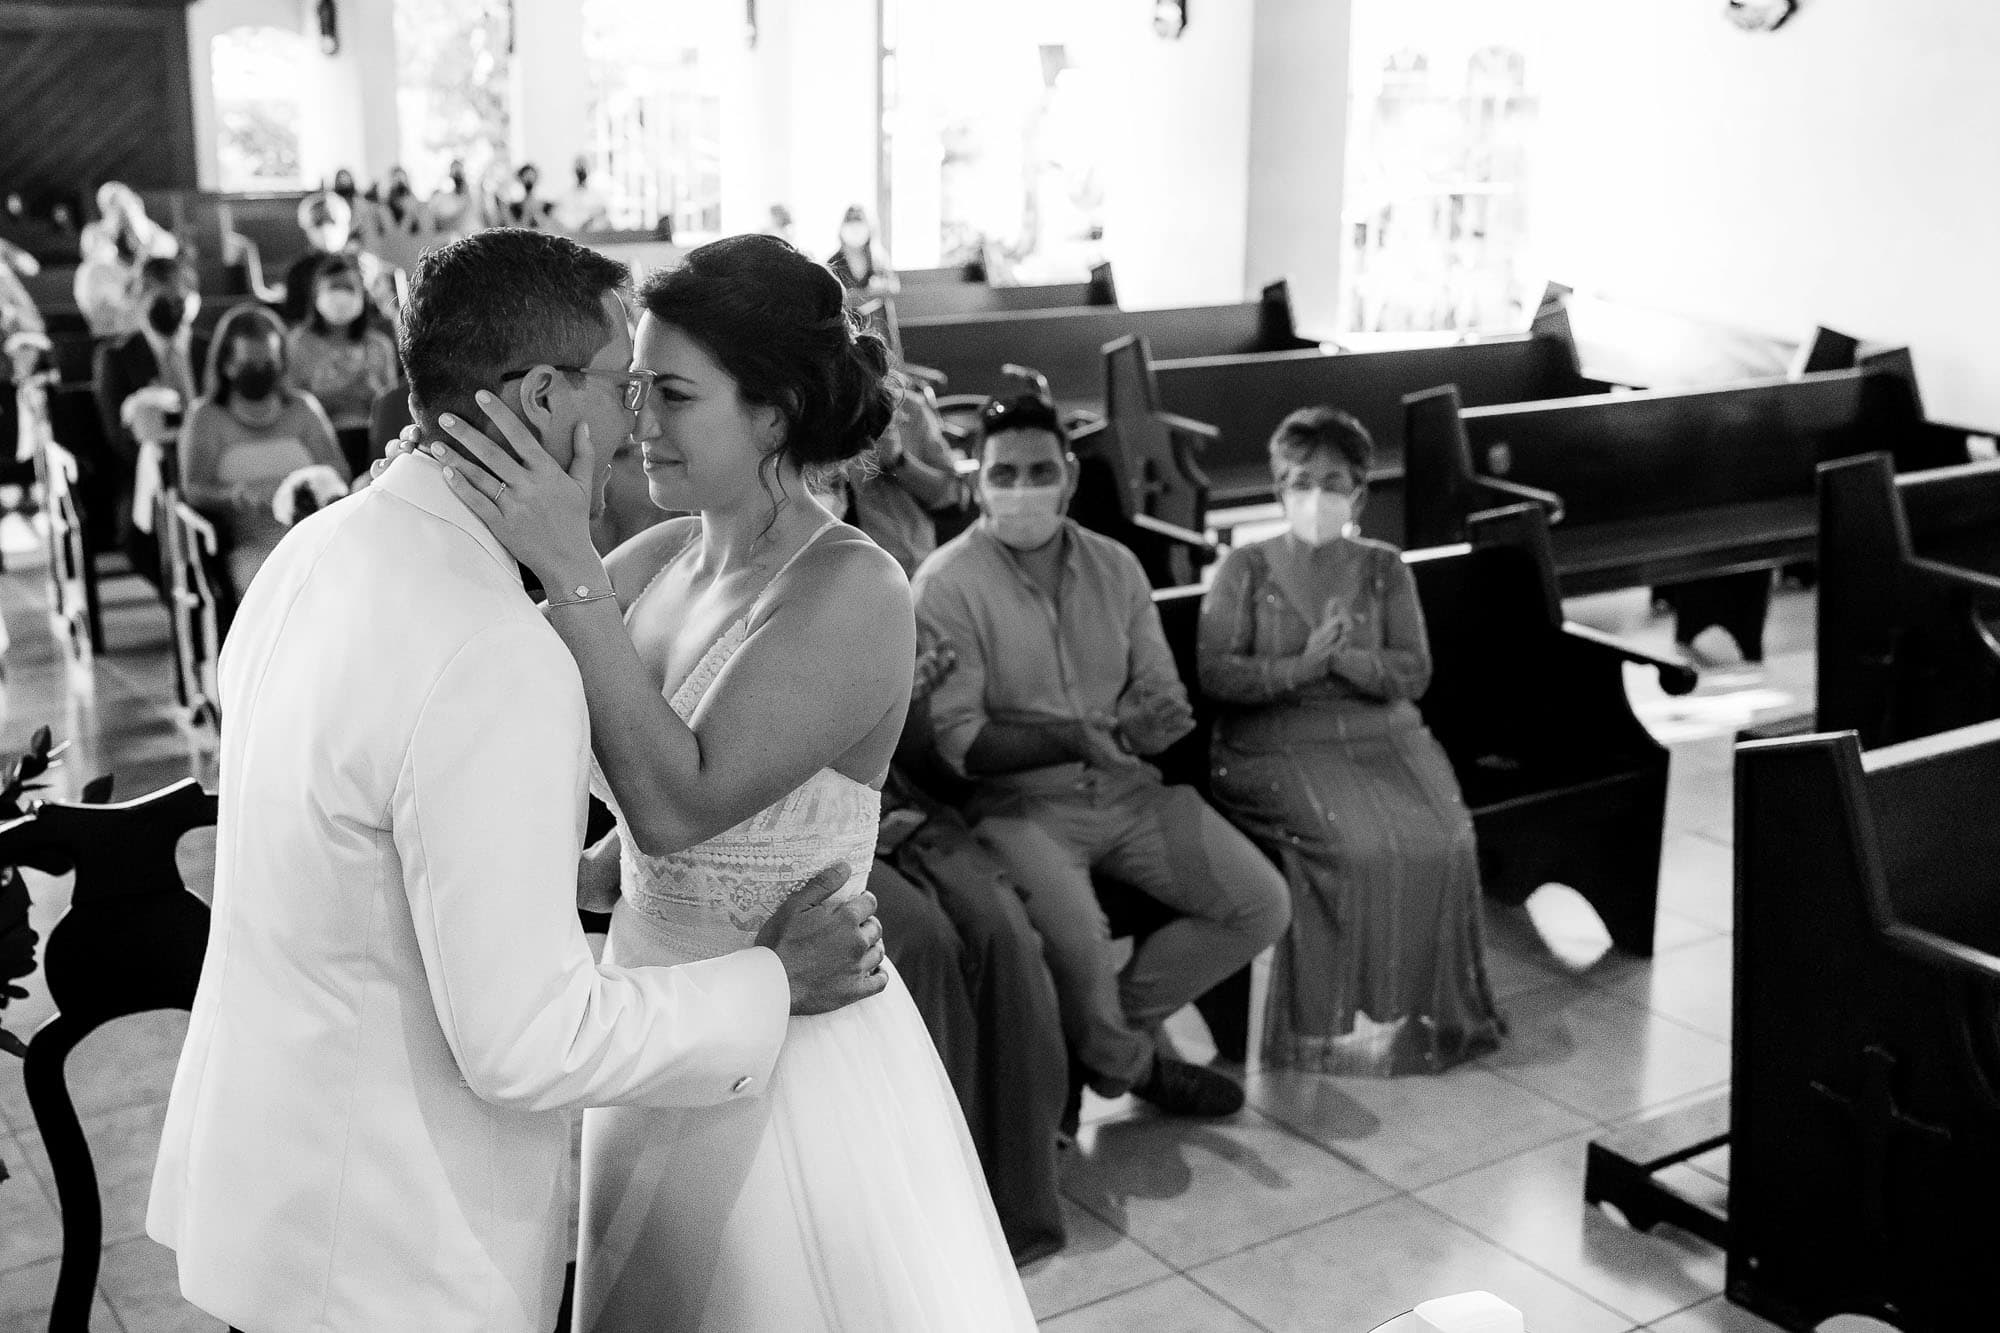 Special kiss the bride moment in black and white